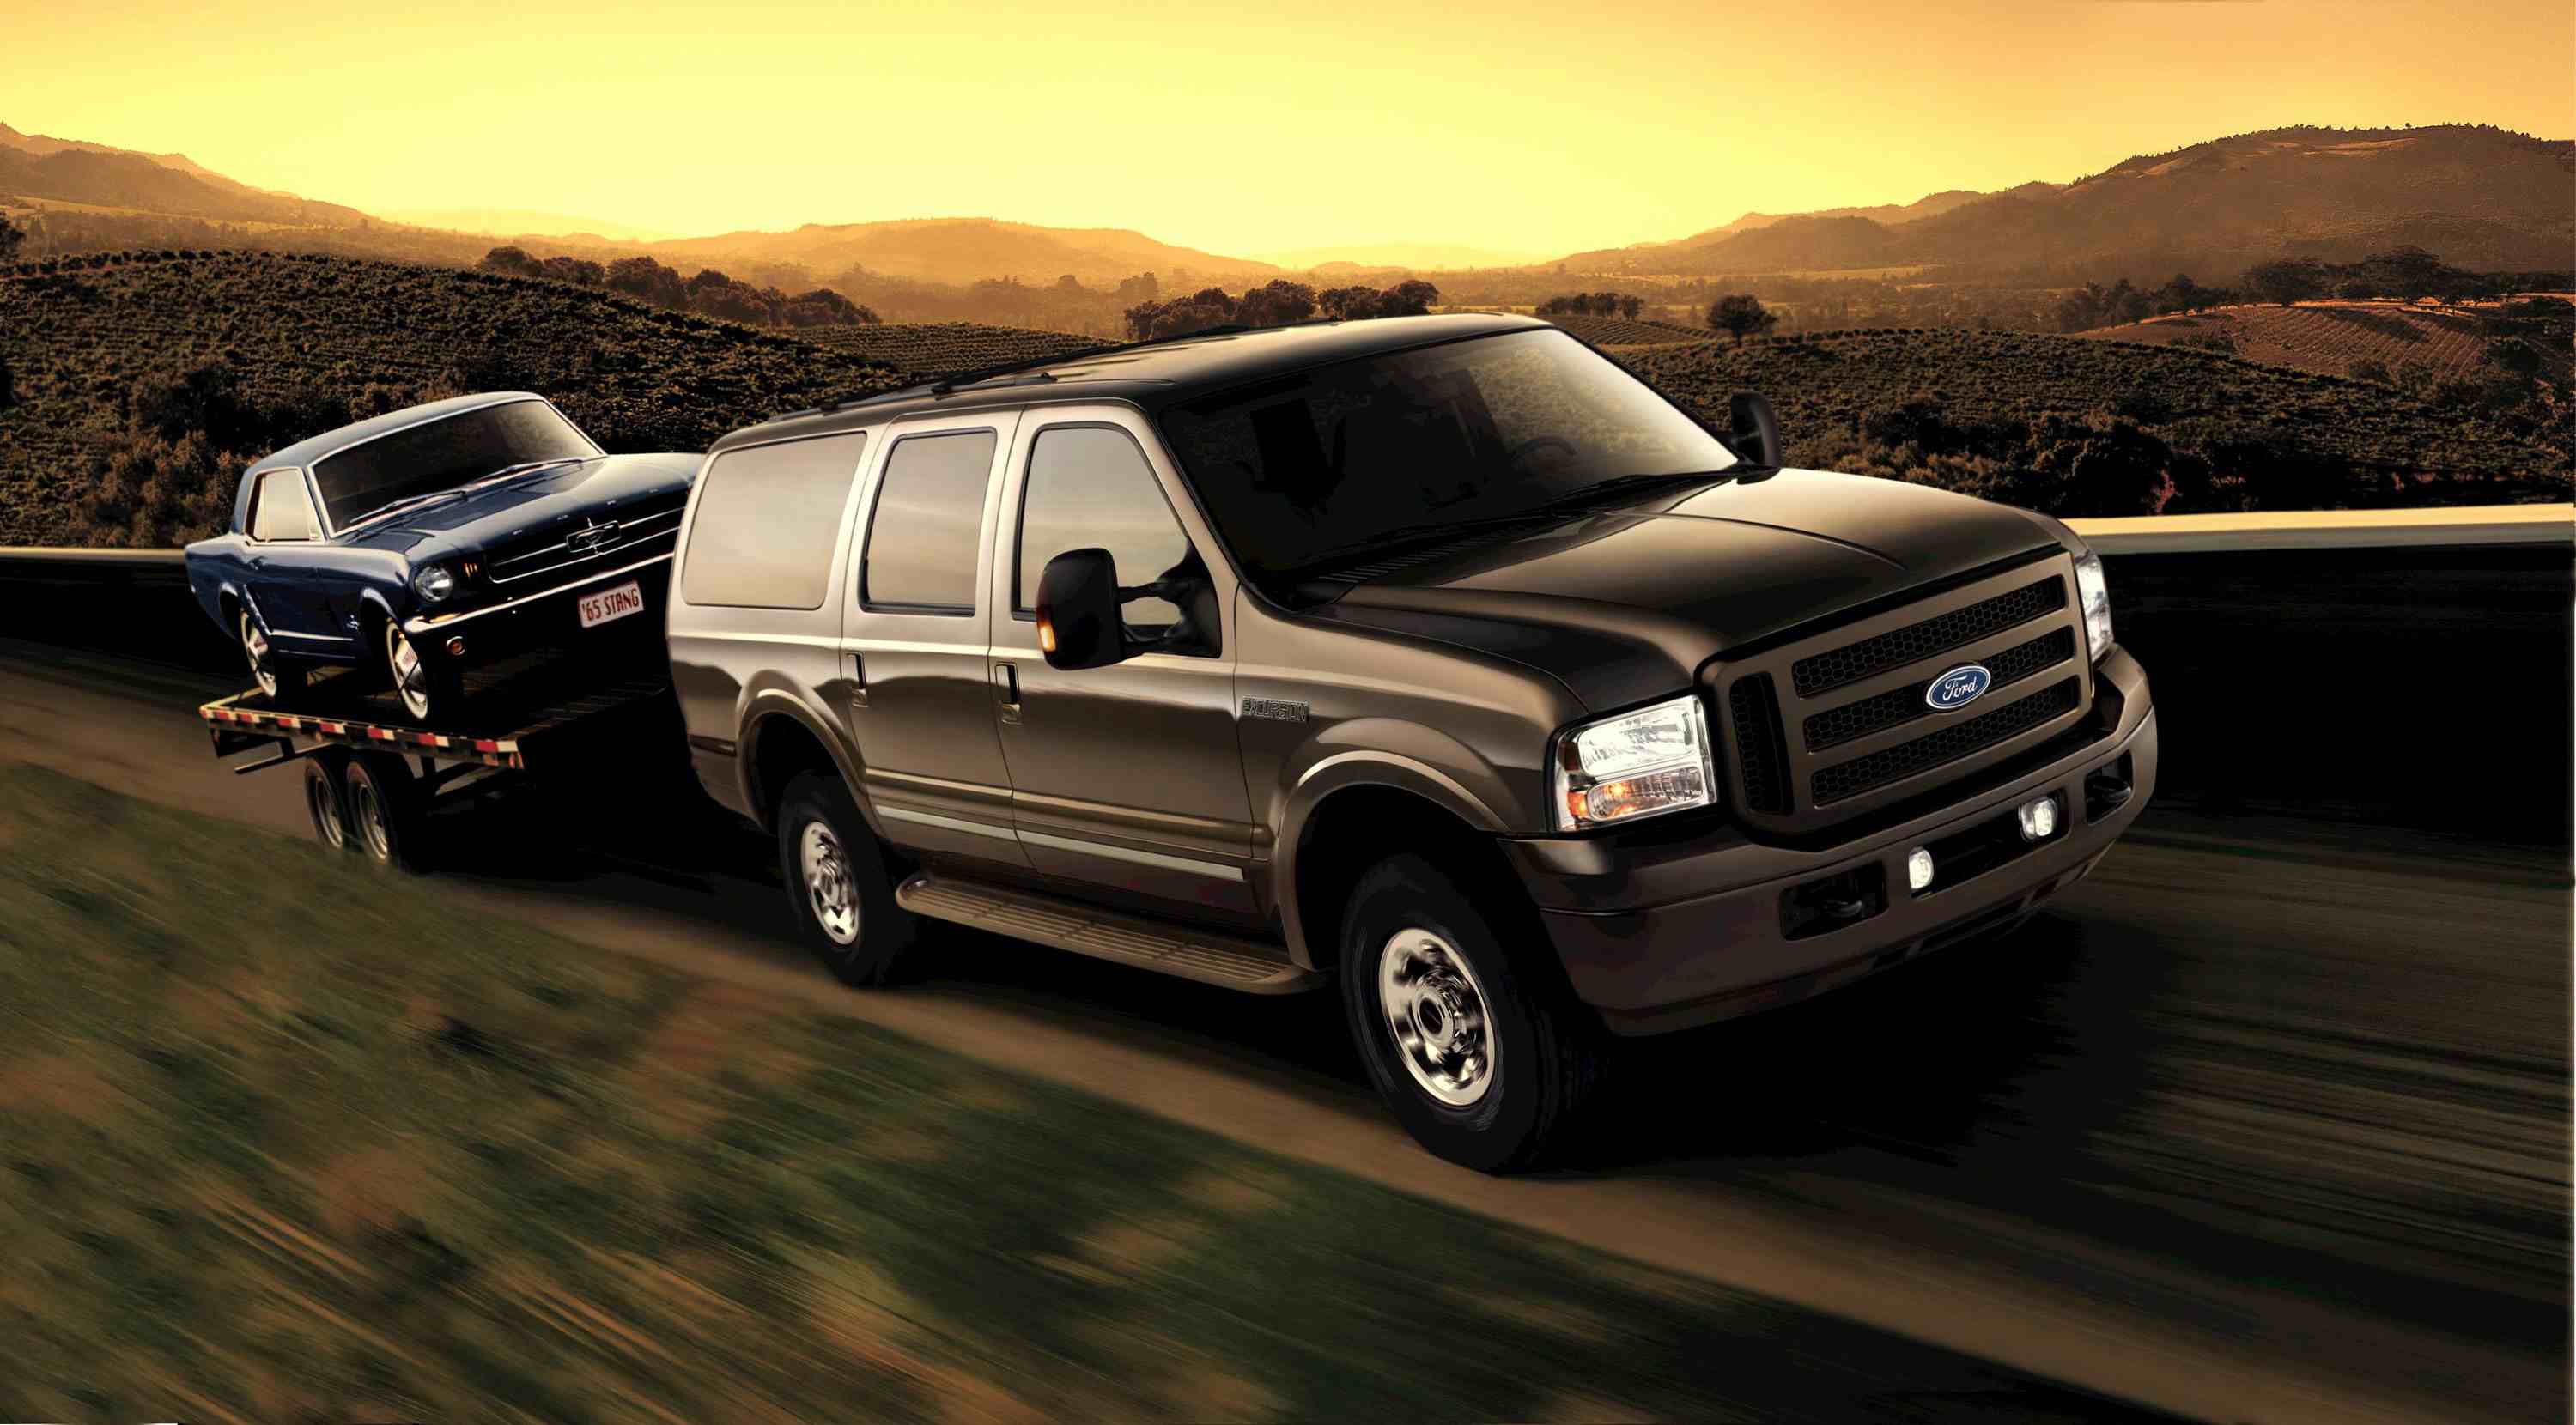 Ford excursion 2014 photo - 4